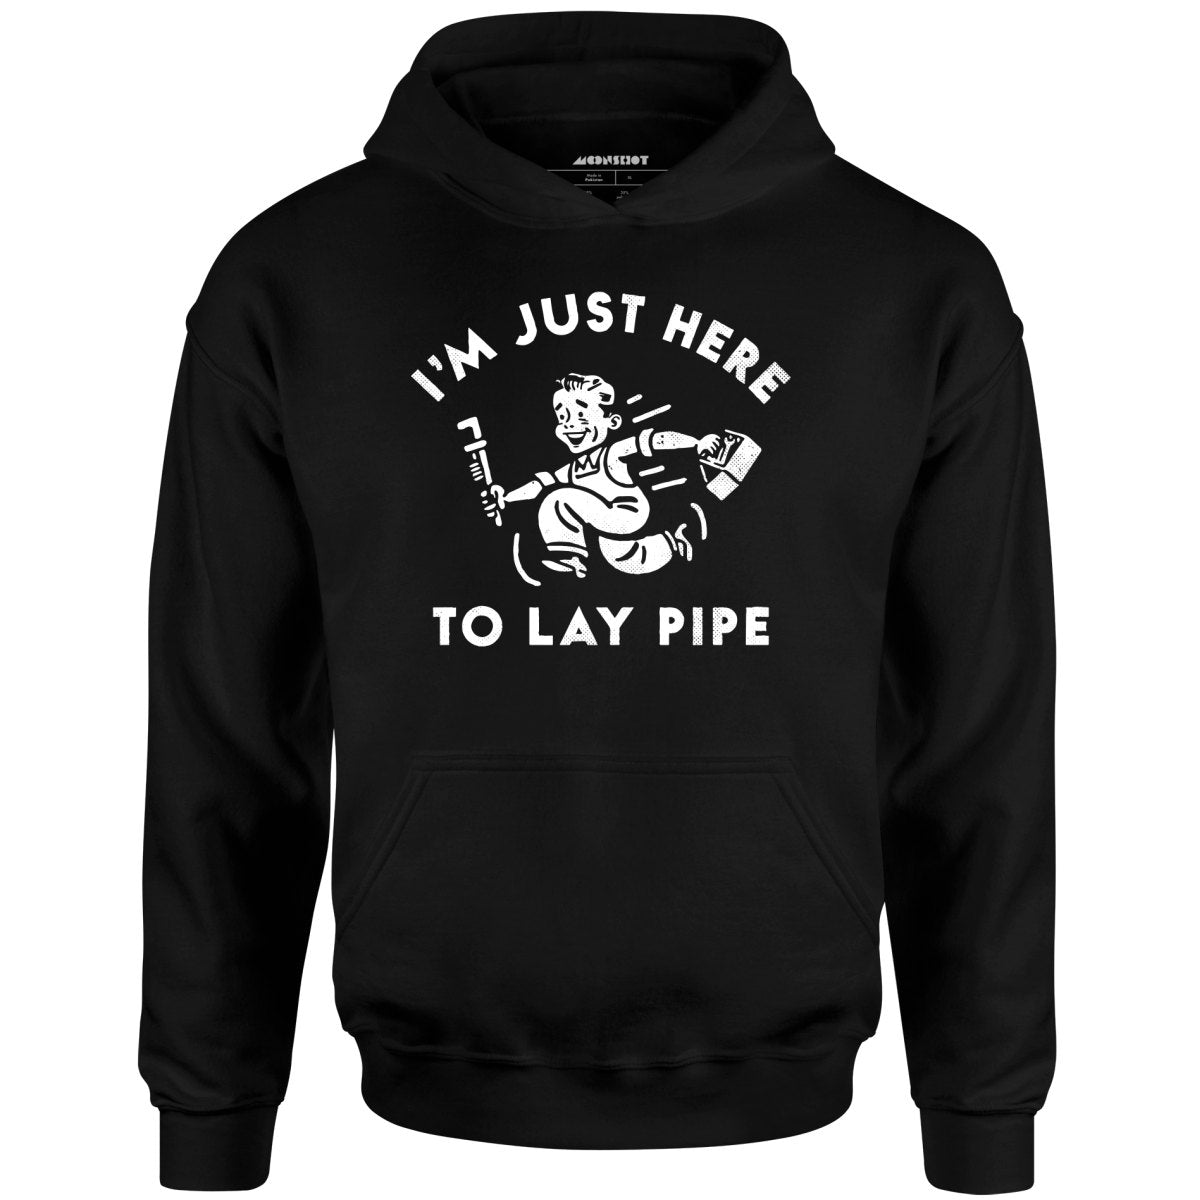 I'm Just Here to Lay Pipe - Unisex Hoodie